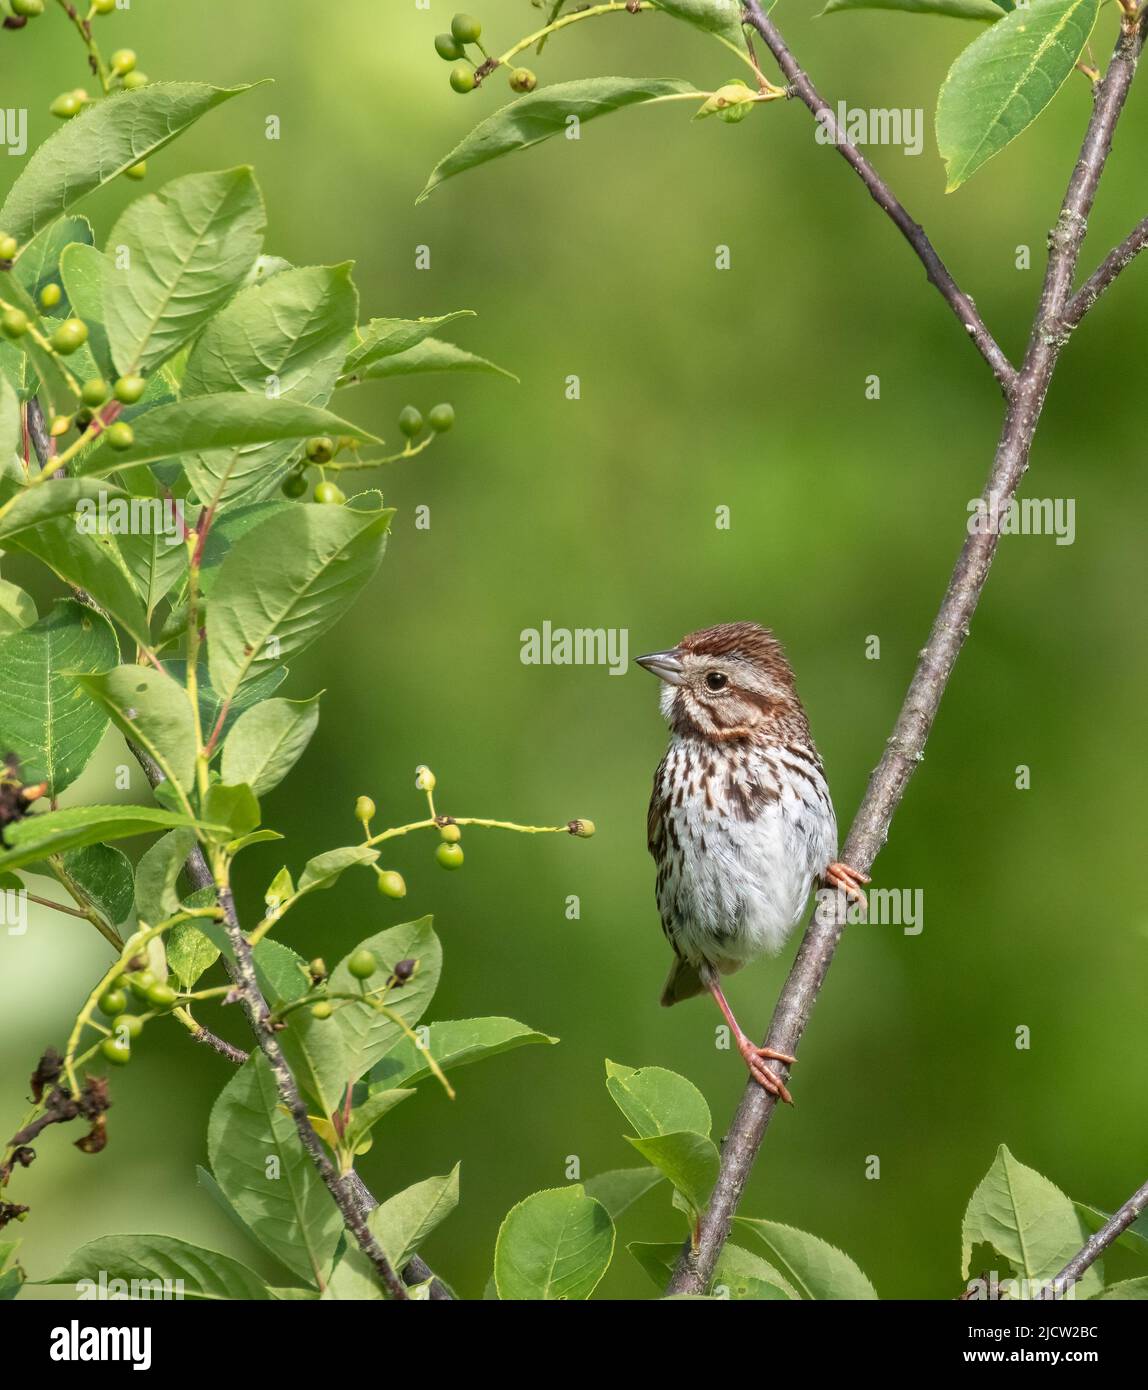 A little Song Sparrow (Melospiza meloodia) posing on a green leafy shrub in spring Stock Photo